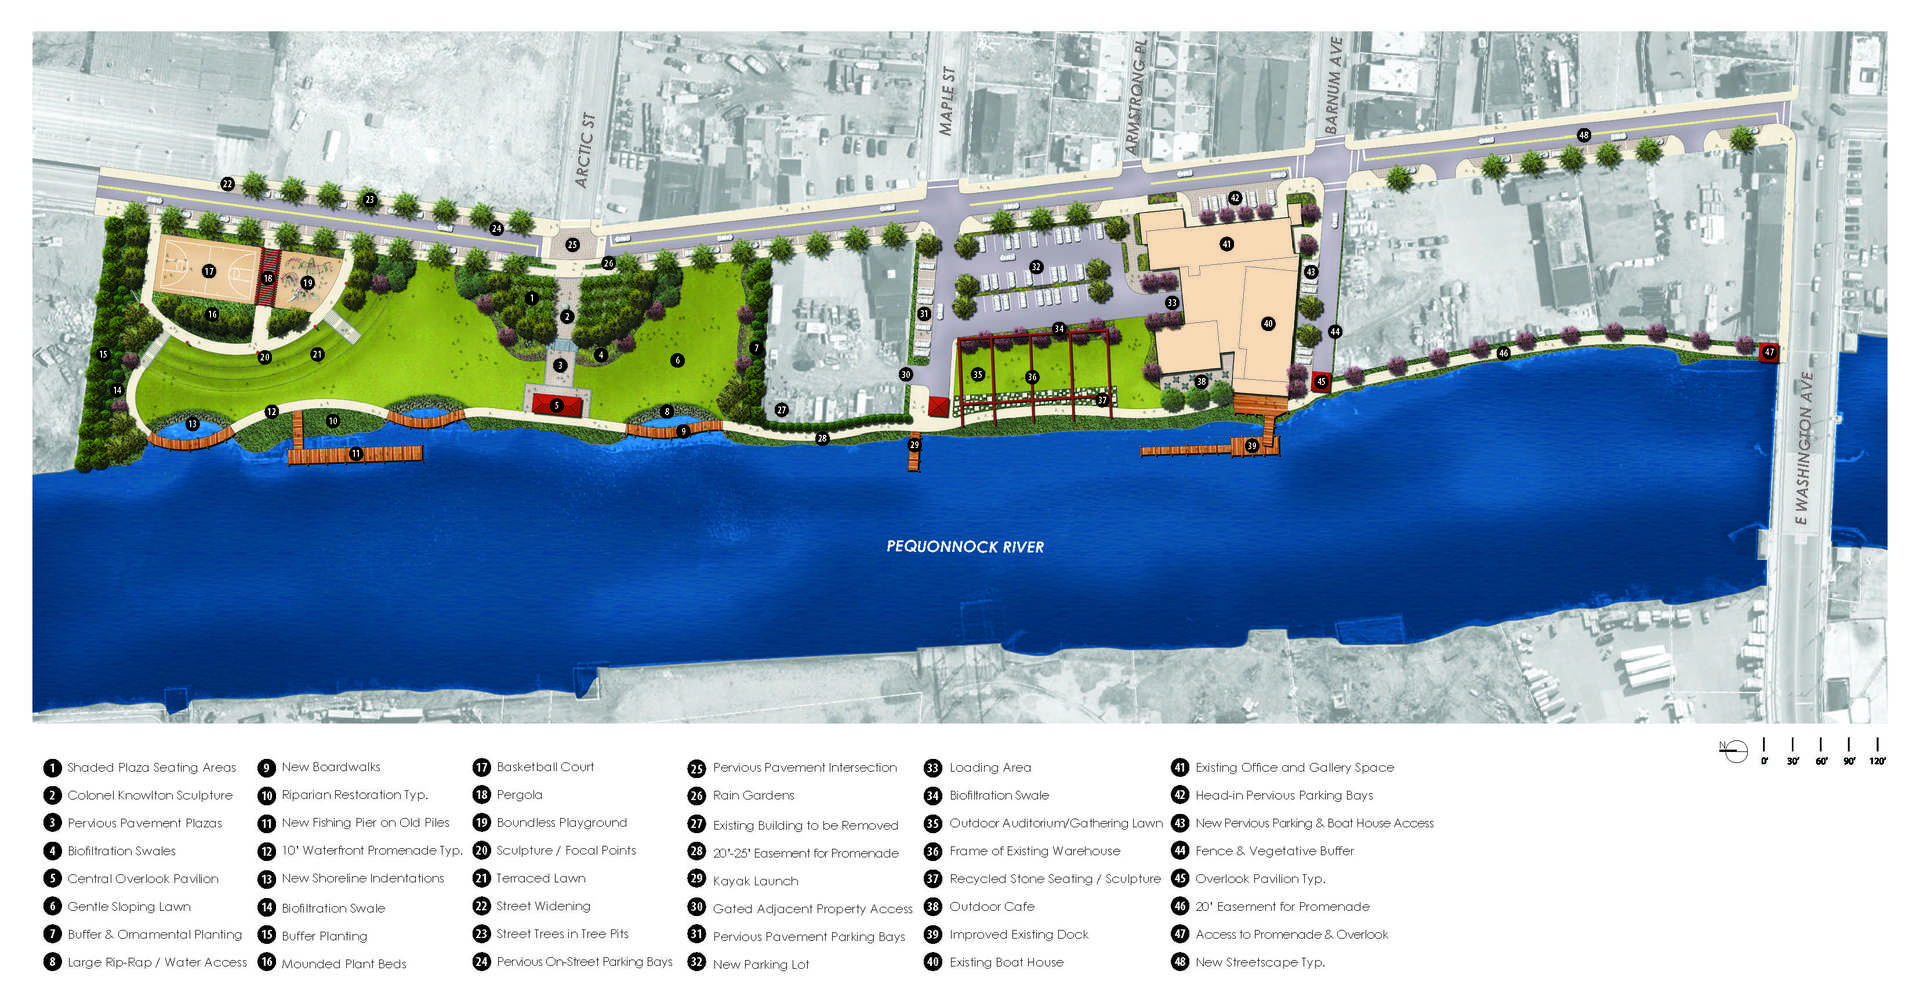 Once industrial parcels along Knowlton Street and the Pequonnock River are being converted into public green space providing new public
<br />water access and an array of passive and active recreation.